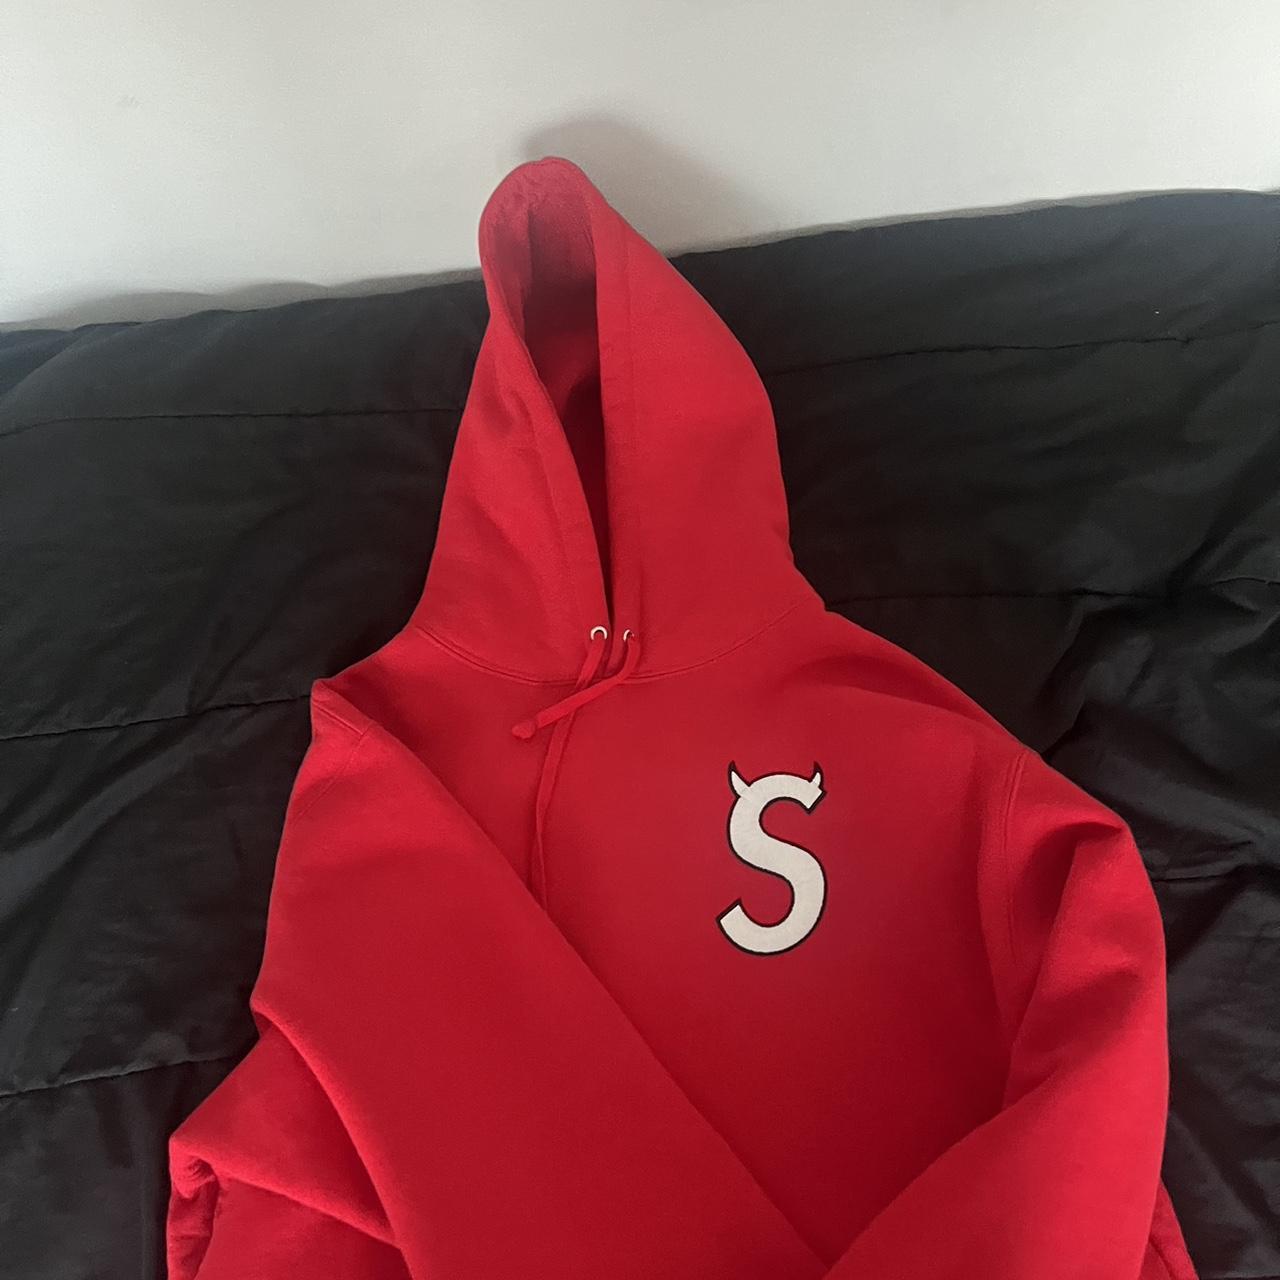 Supreme hoodie • Price is p firm on this one! • - Depop